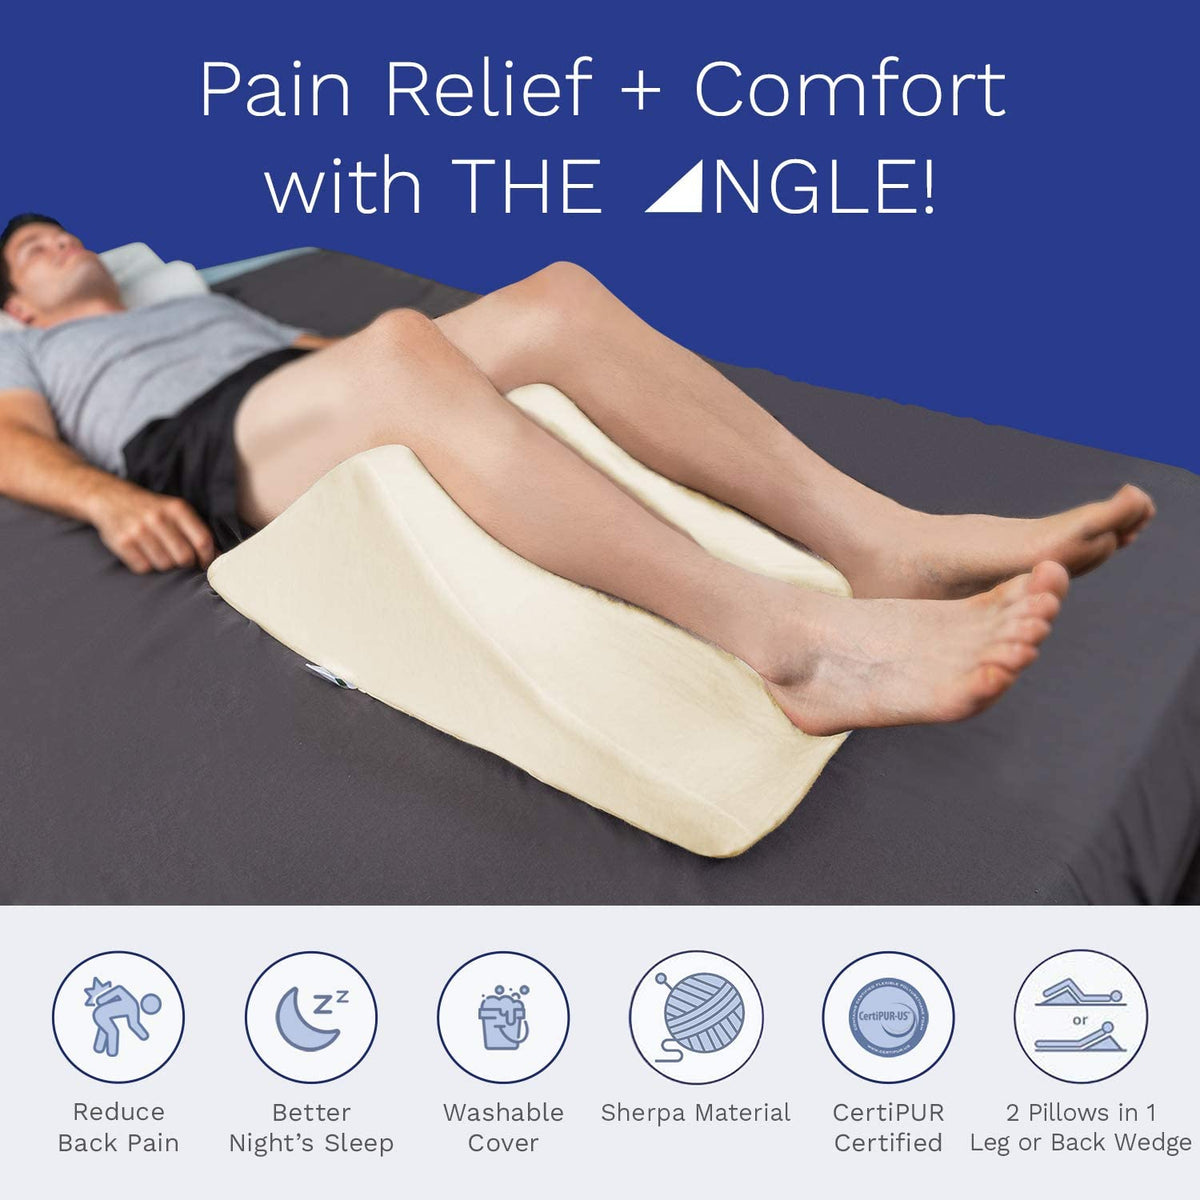 Leg Pillow for Back Pain, Eco Friendly, Medical Quality Memory Foam Bed  Wedge Leg Pillow with Bamboo Cover